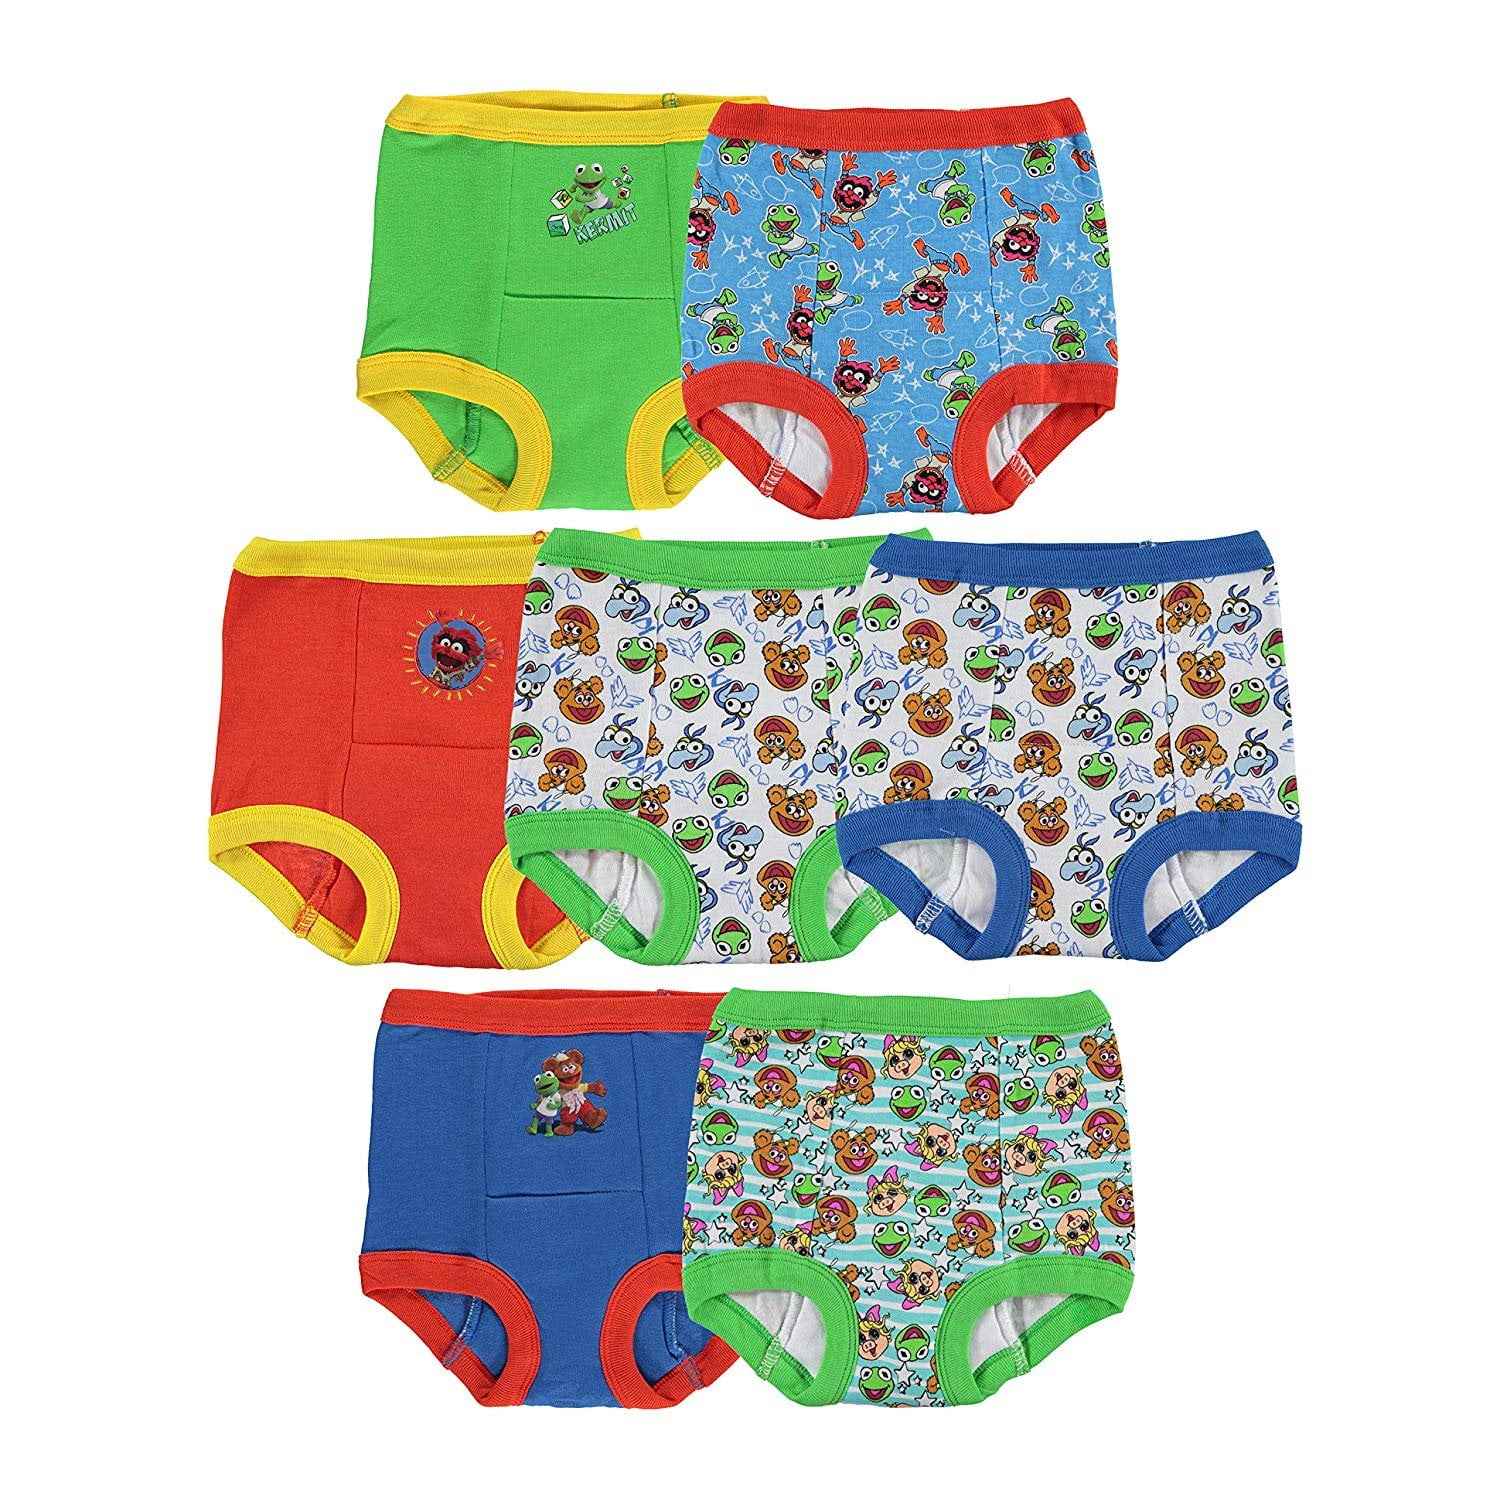 Cars, Toy Story & Monsters Inc. Variety Toddler Boy Brief Underwear,  7-Pack, Sizes 3T-4T 